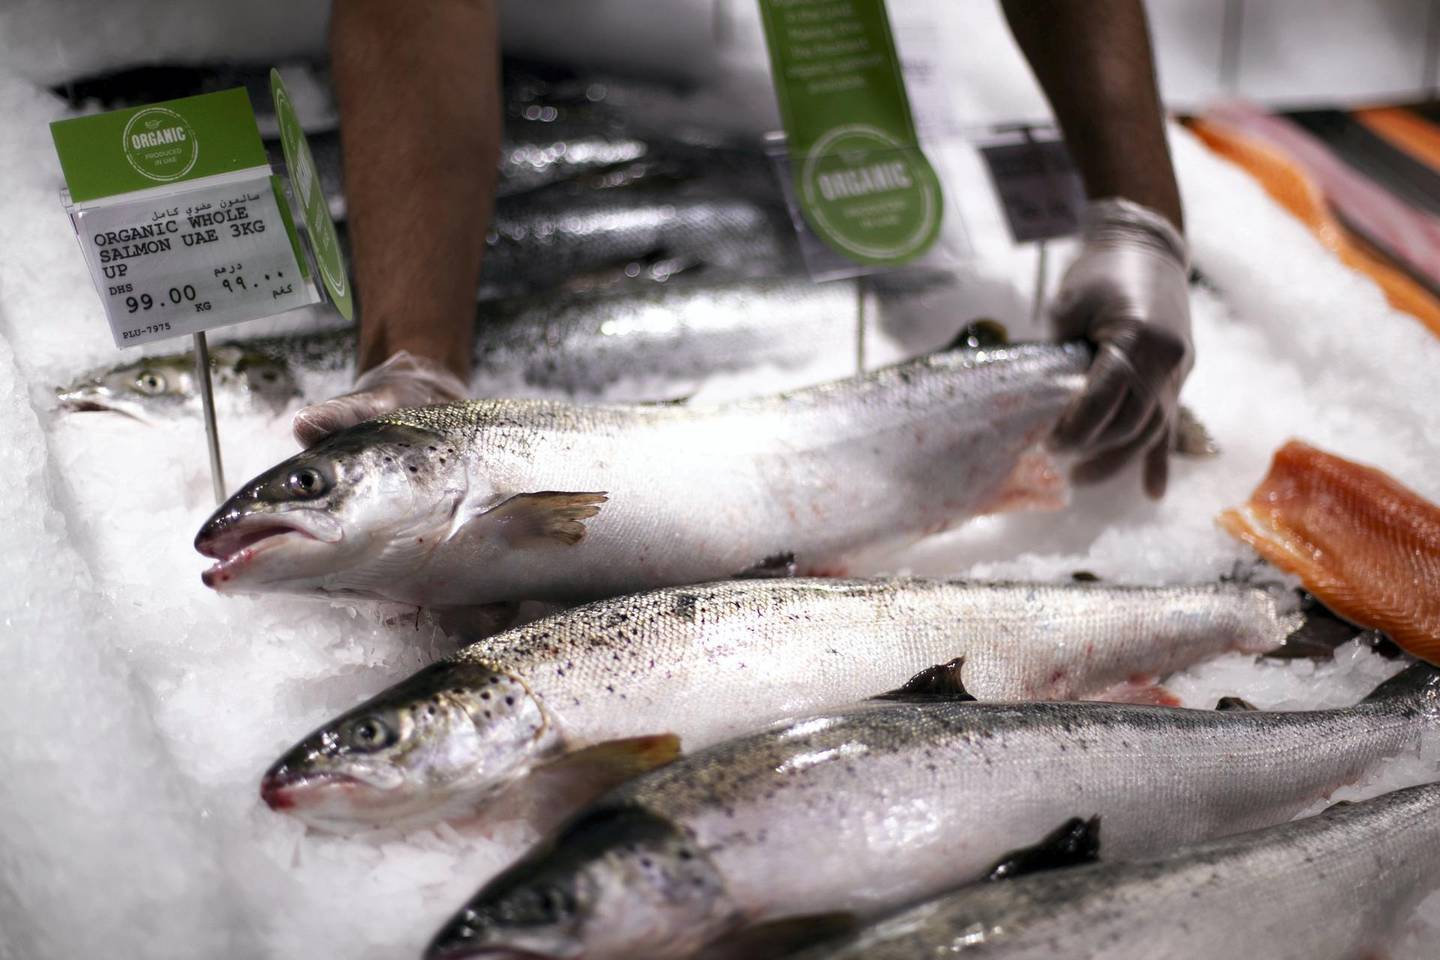 DUBAI, UNITED ARAB EMIRATES - April 4 2019.Fish Farm salmon in Spinney's.Fish Farm LLC is bringing home-grown salmon to the UAE's supermarkets and restaurants, with positive implications for food security. (Photo by Reem Mohammed/The National)Reporter: Section:  NA